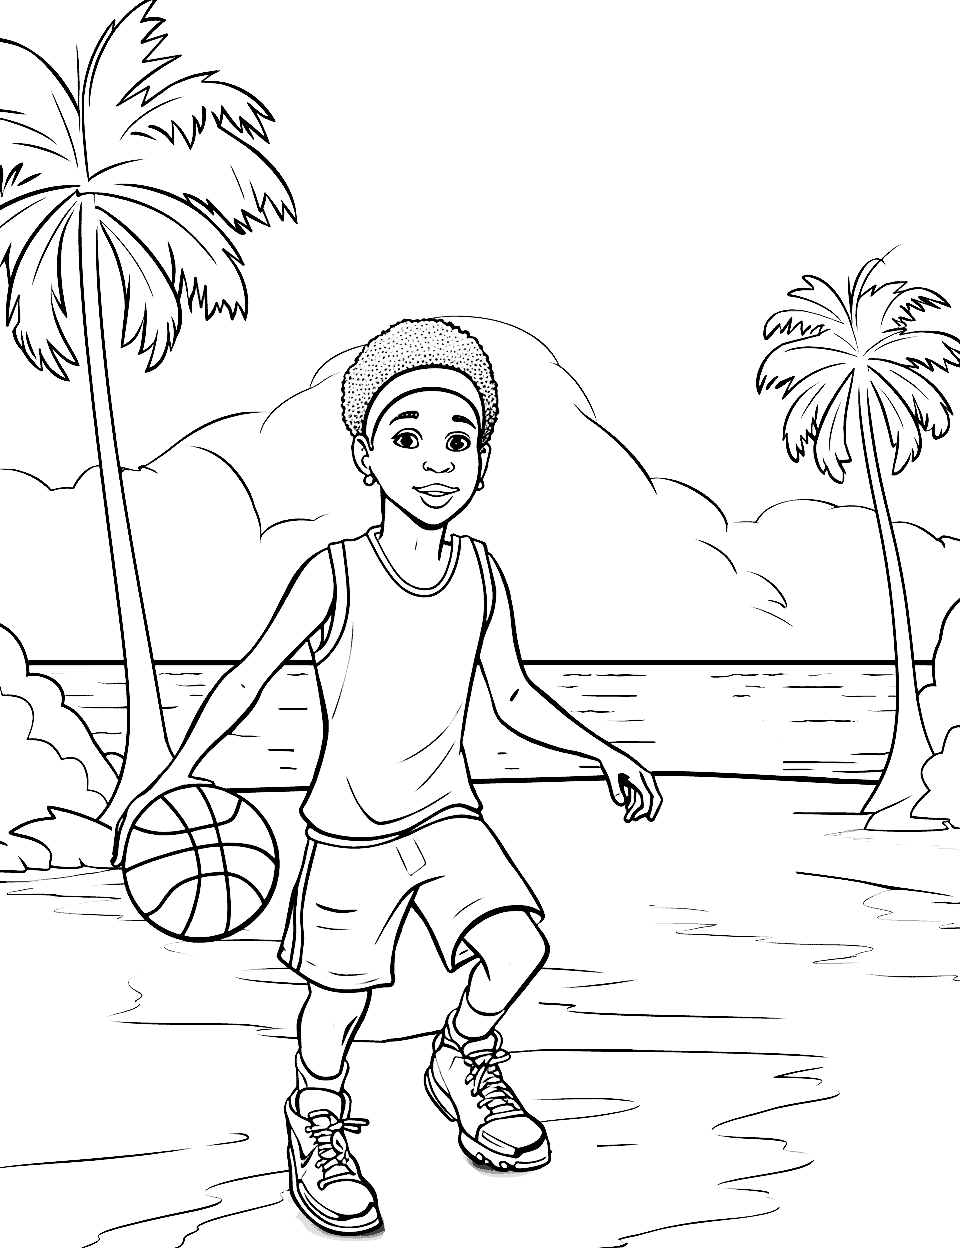 Beach Basketball Holiday Coloring Page - A kid playing basketball on a beach with a simple ocean and palm tree background.